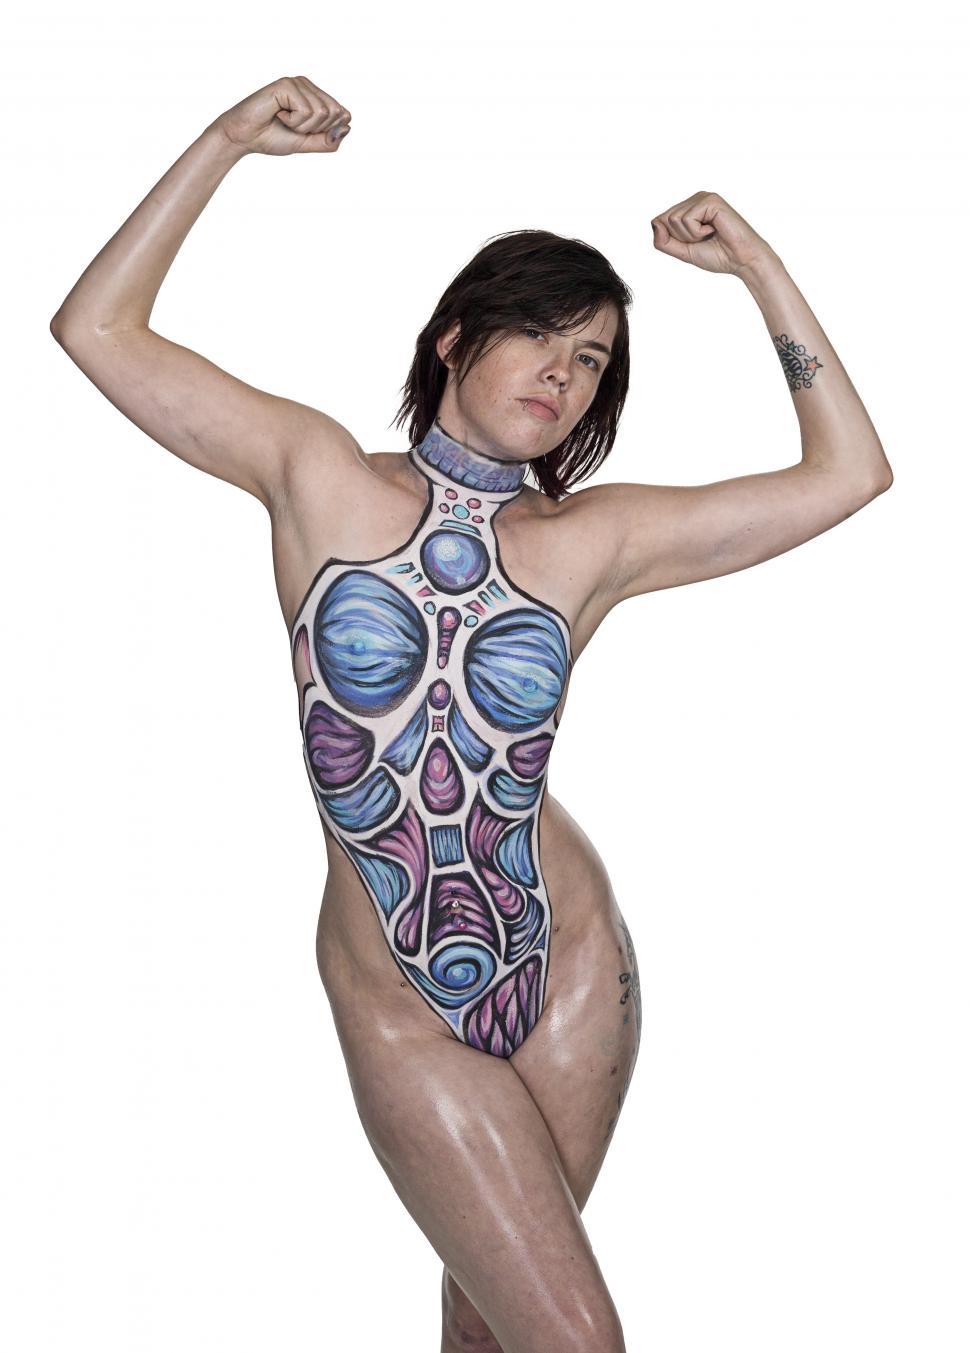 Download Free Stock Photo of Macie Body Painted Swimsuit 